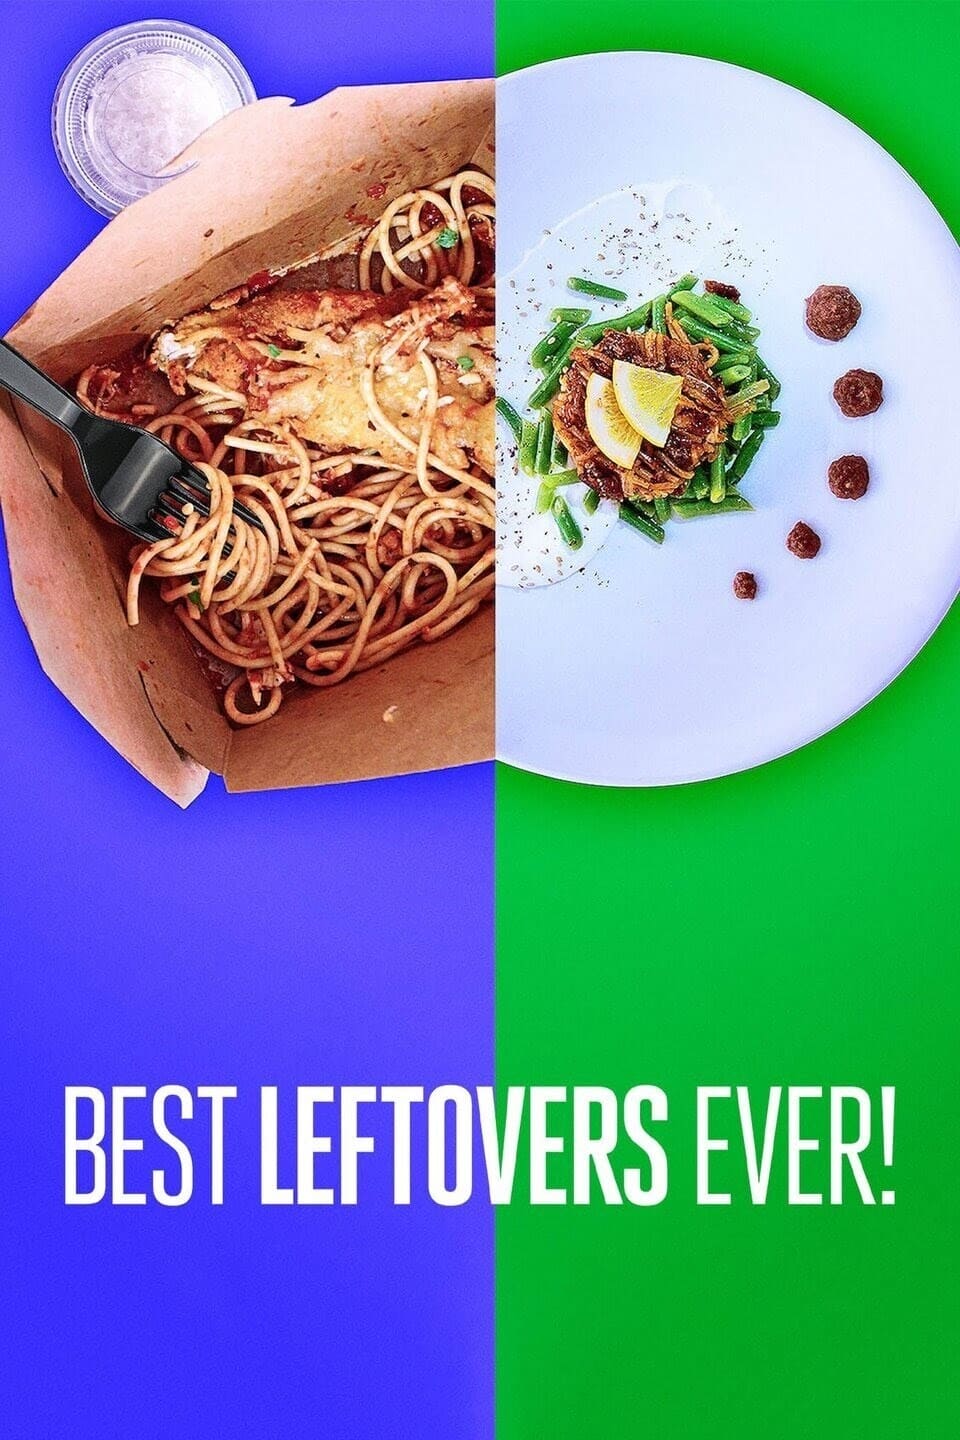 Best Leftovers Ever! TV Shows About Prize